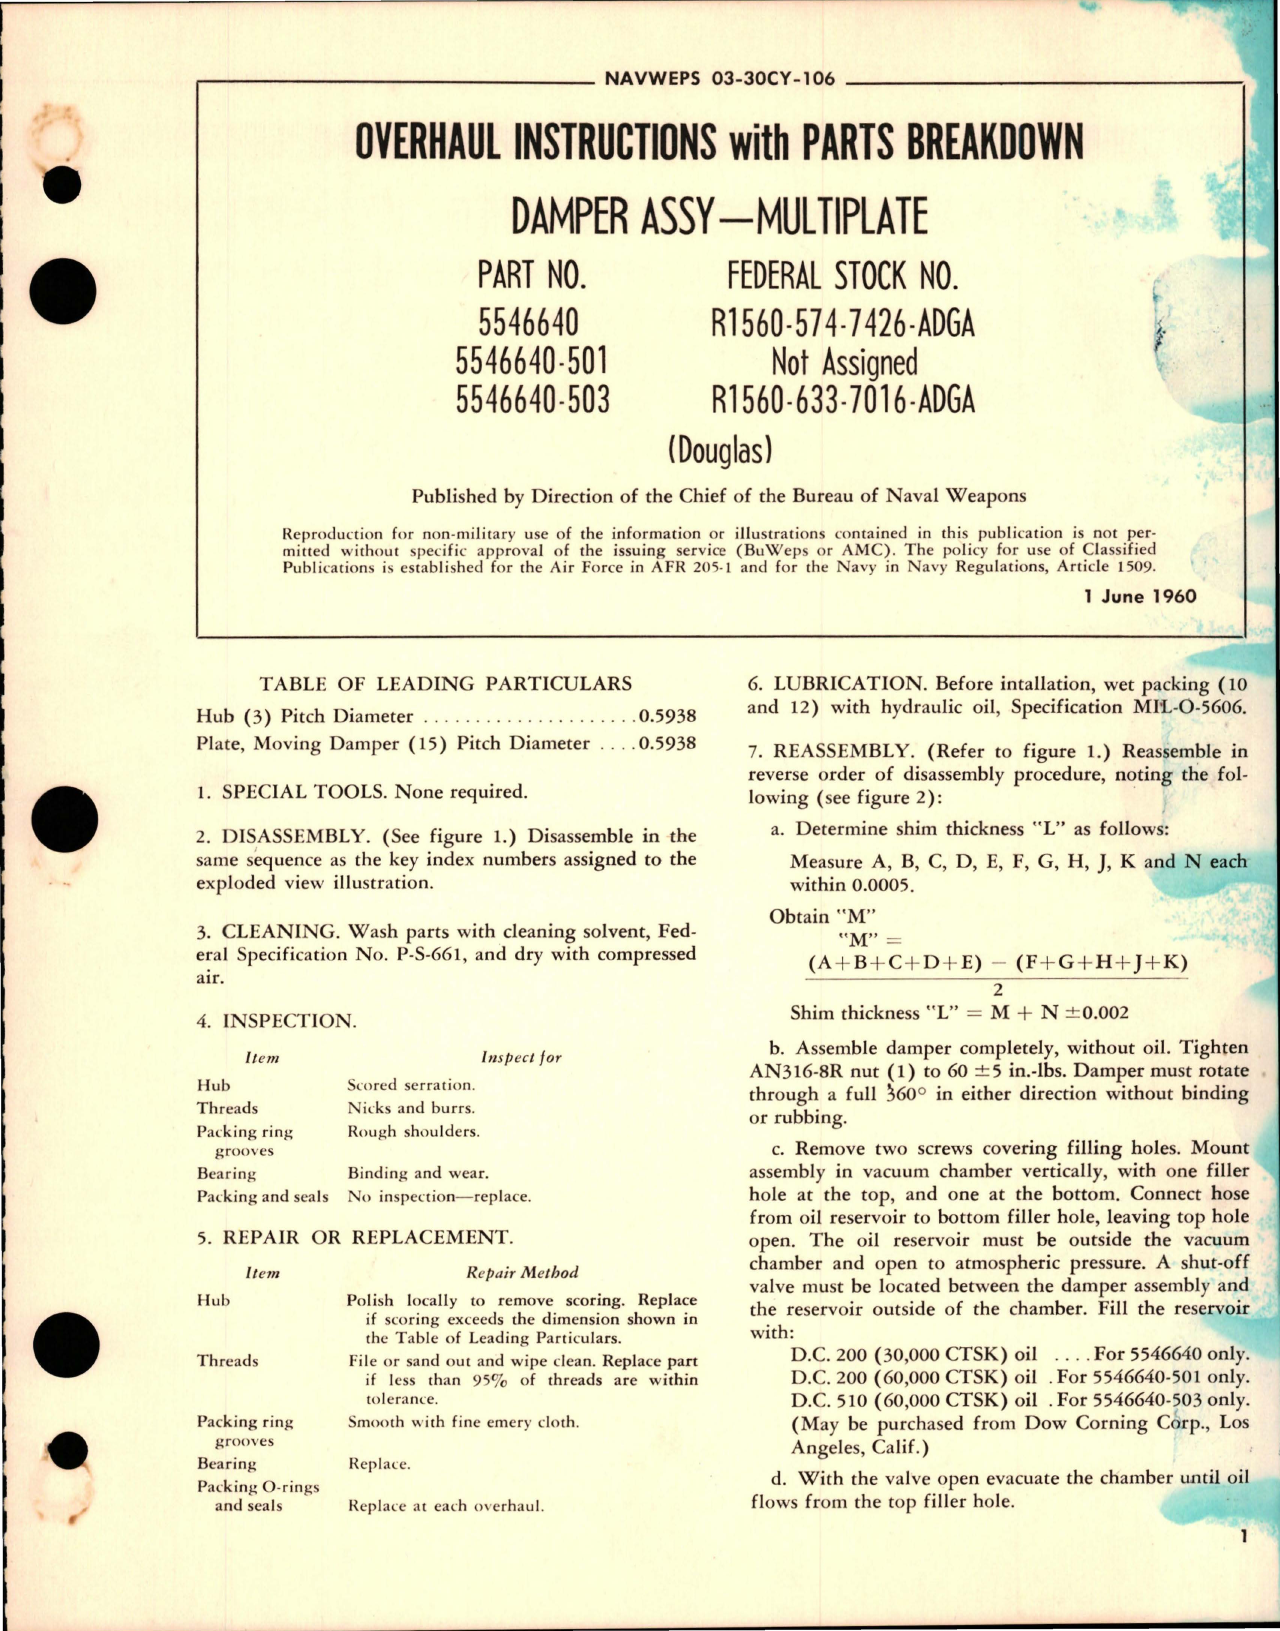 Sample page 1 from AirCorps Library document: Overhaul Instructions with Parts for Multiplate Damper Assembly - Part 5546640, 5546640-501, and 5546640-503